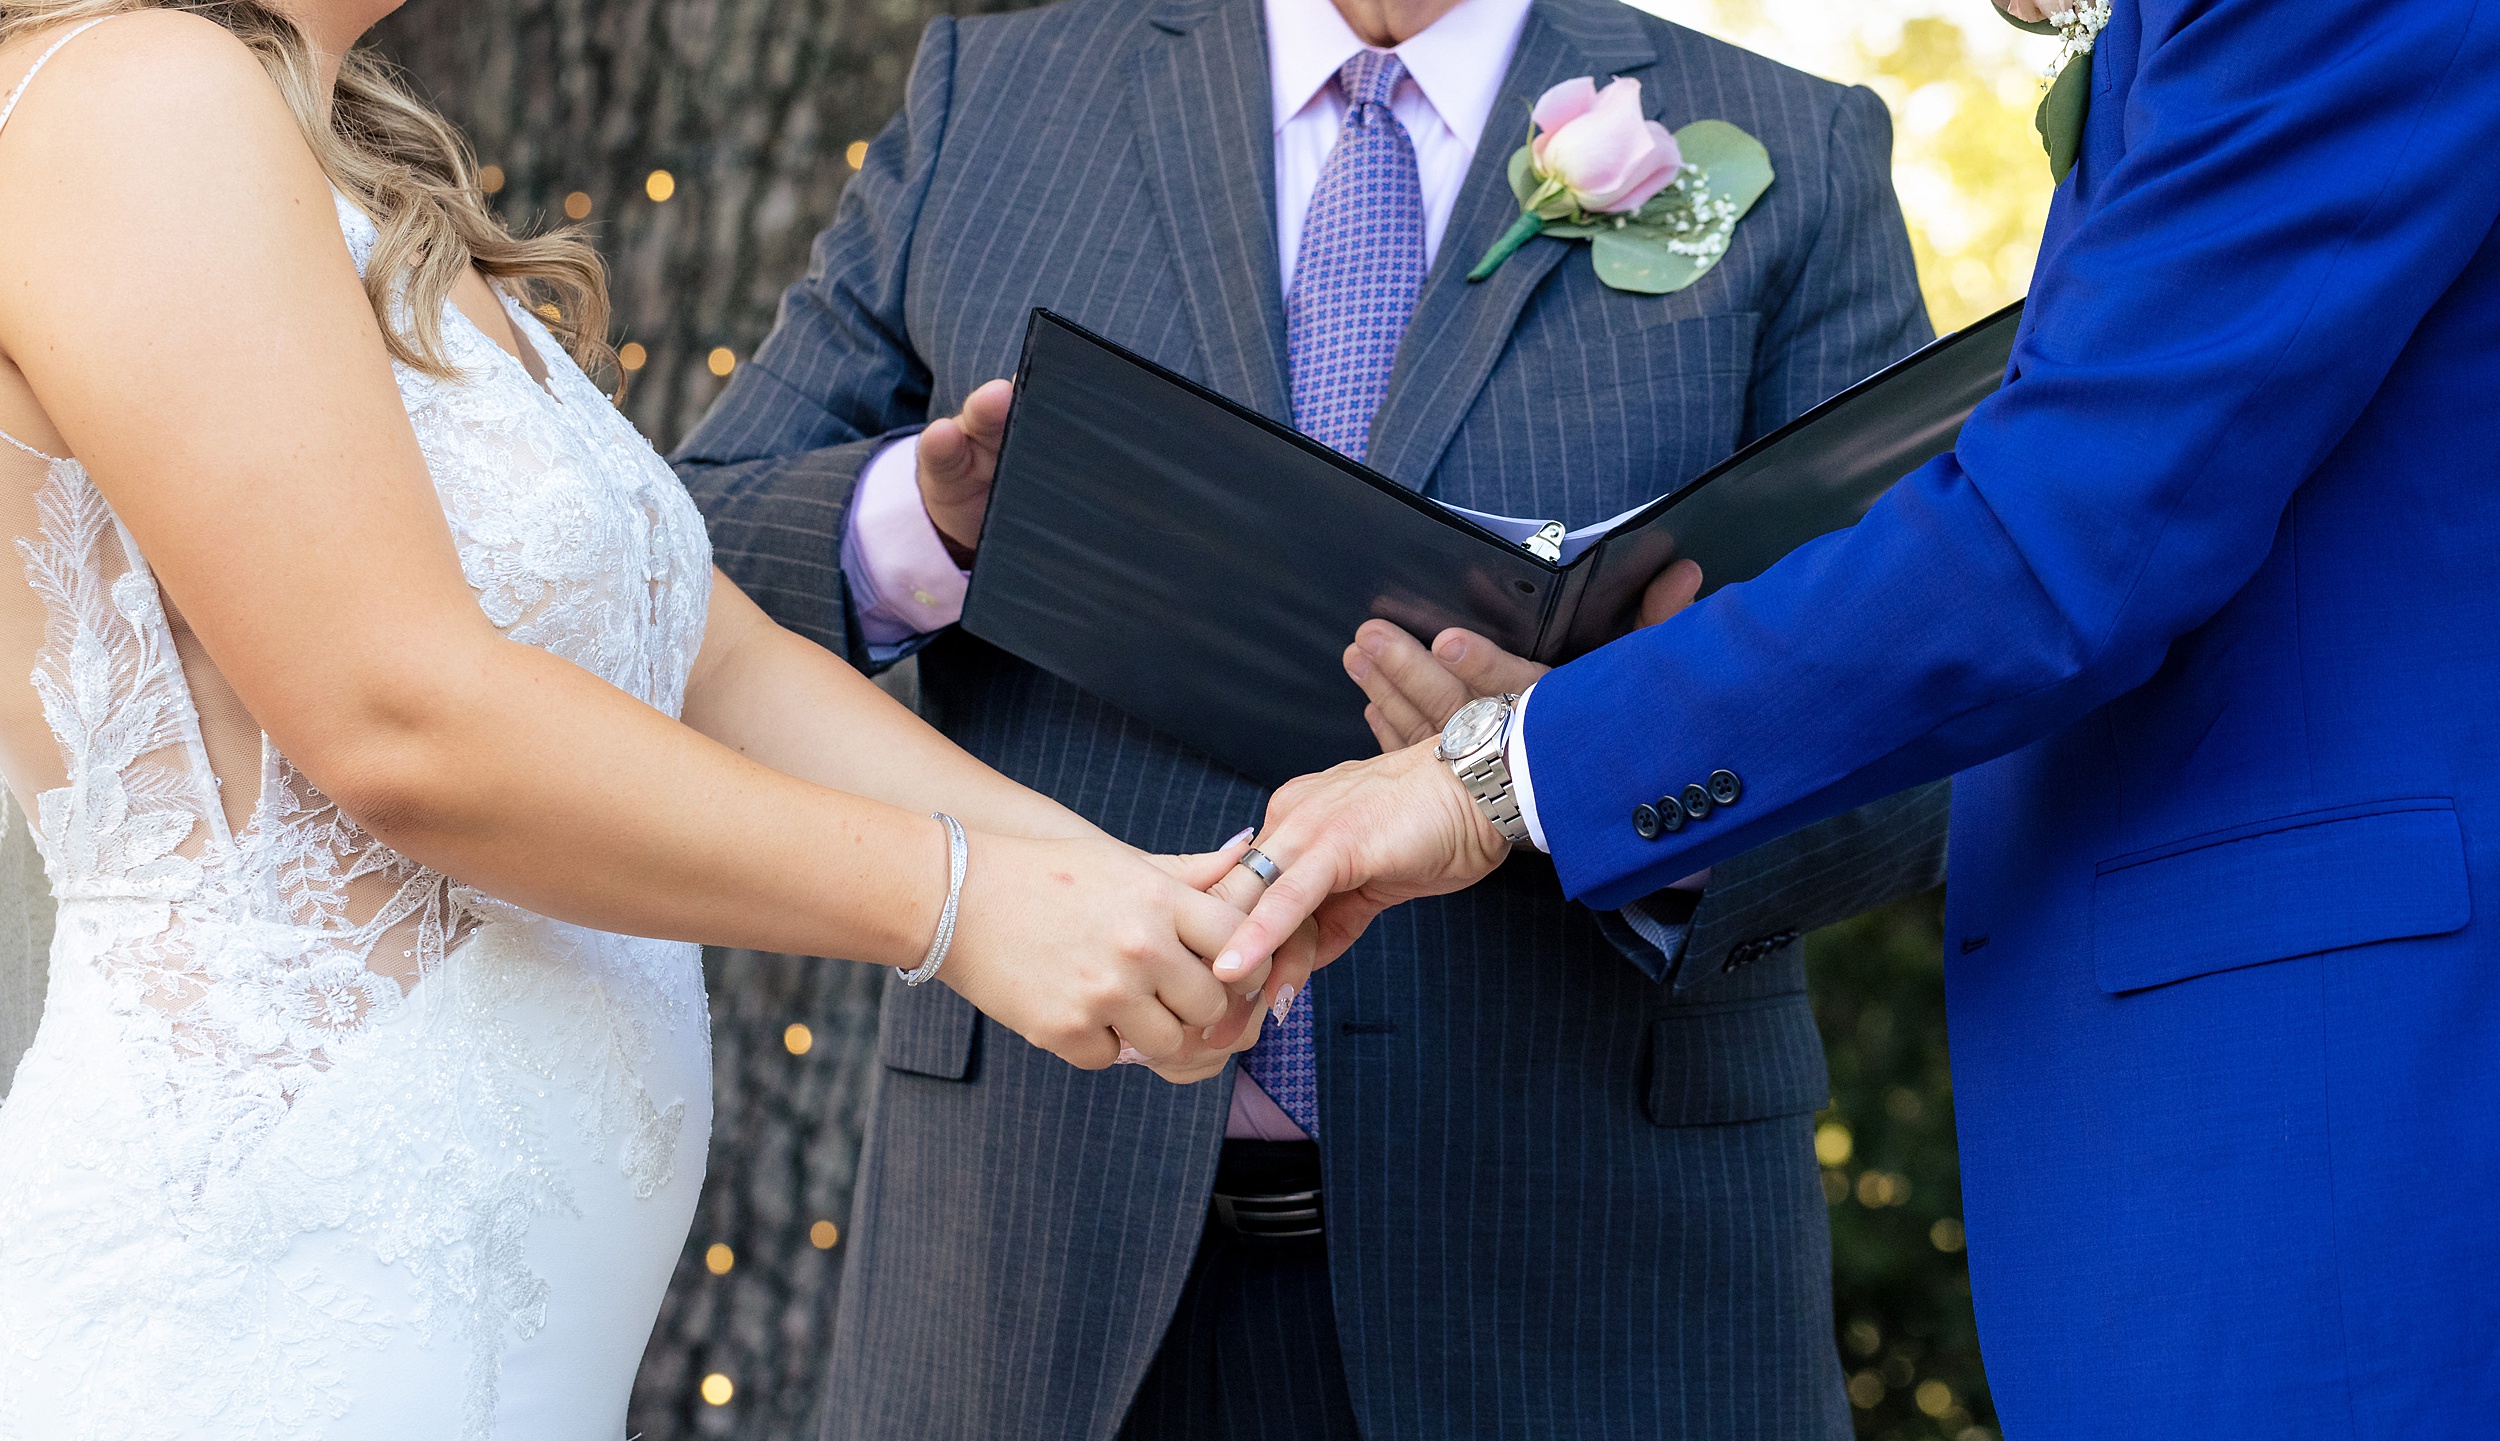 Details of newlyweds holding hands during their wedding tpc sawgrass wedding ceremony